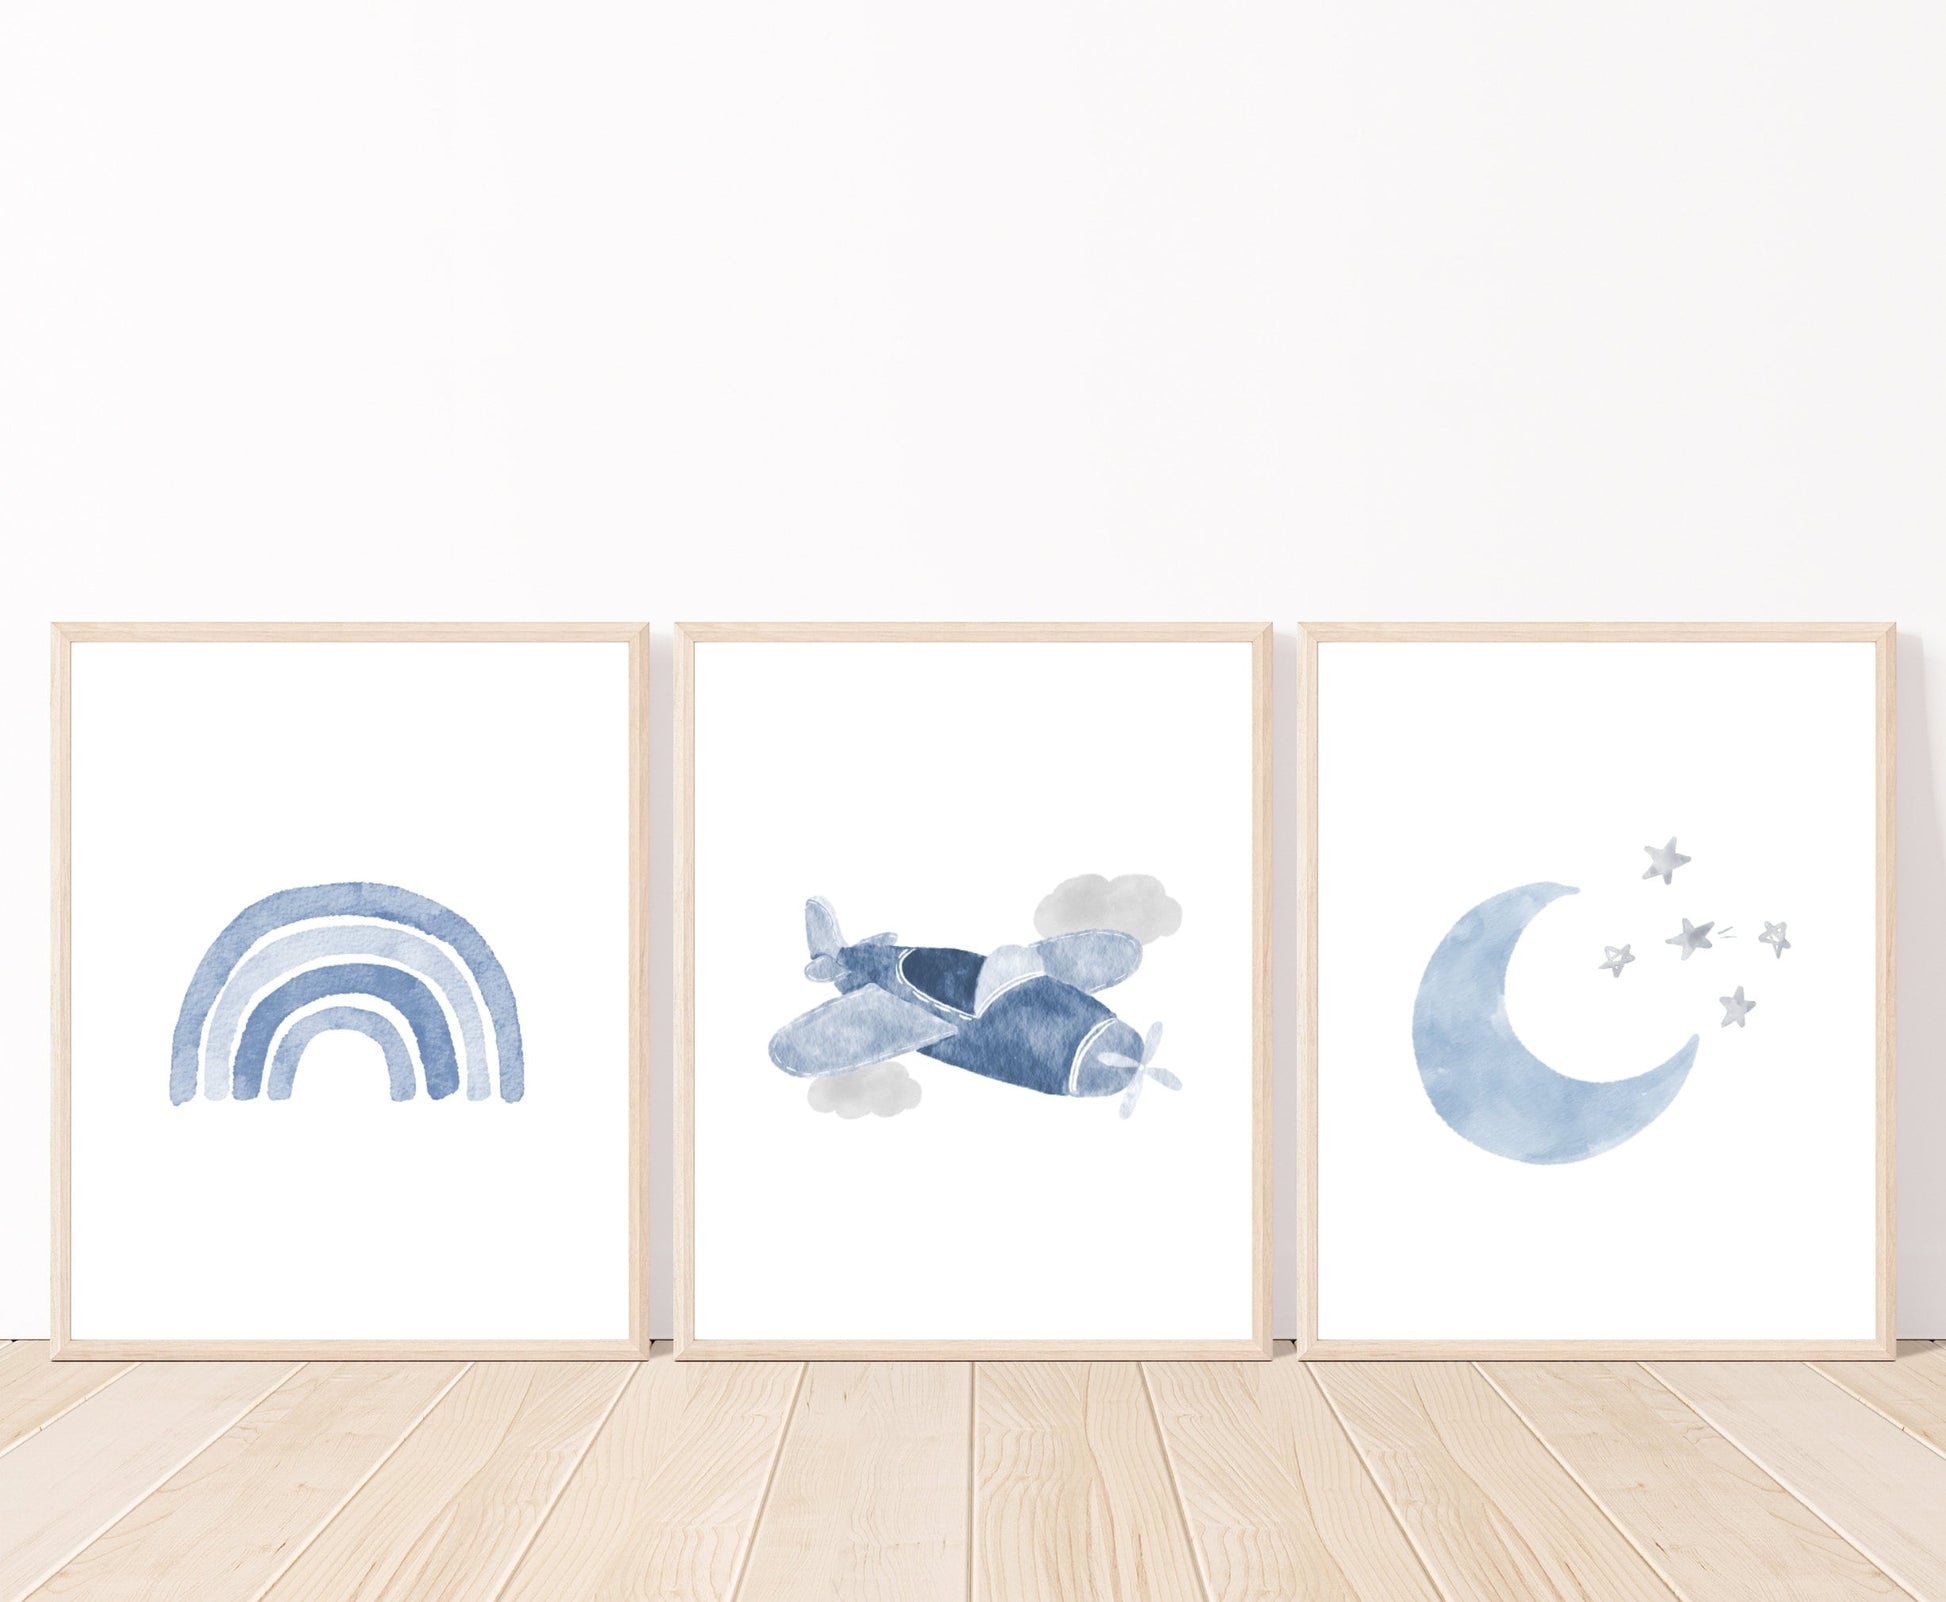 An image showing three digital prints placed on a white wall and parquet flooring. The first one shows a baby blue rainbow design. The second one shows a blue airplane and two gray clouds. The third one shows a baby blue crescent and some tiny gray stars beside it.